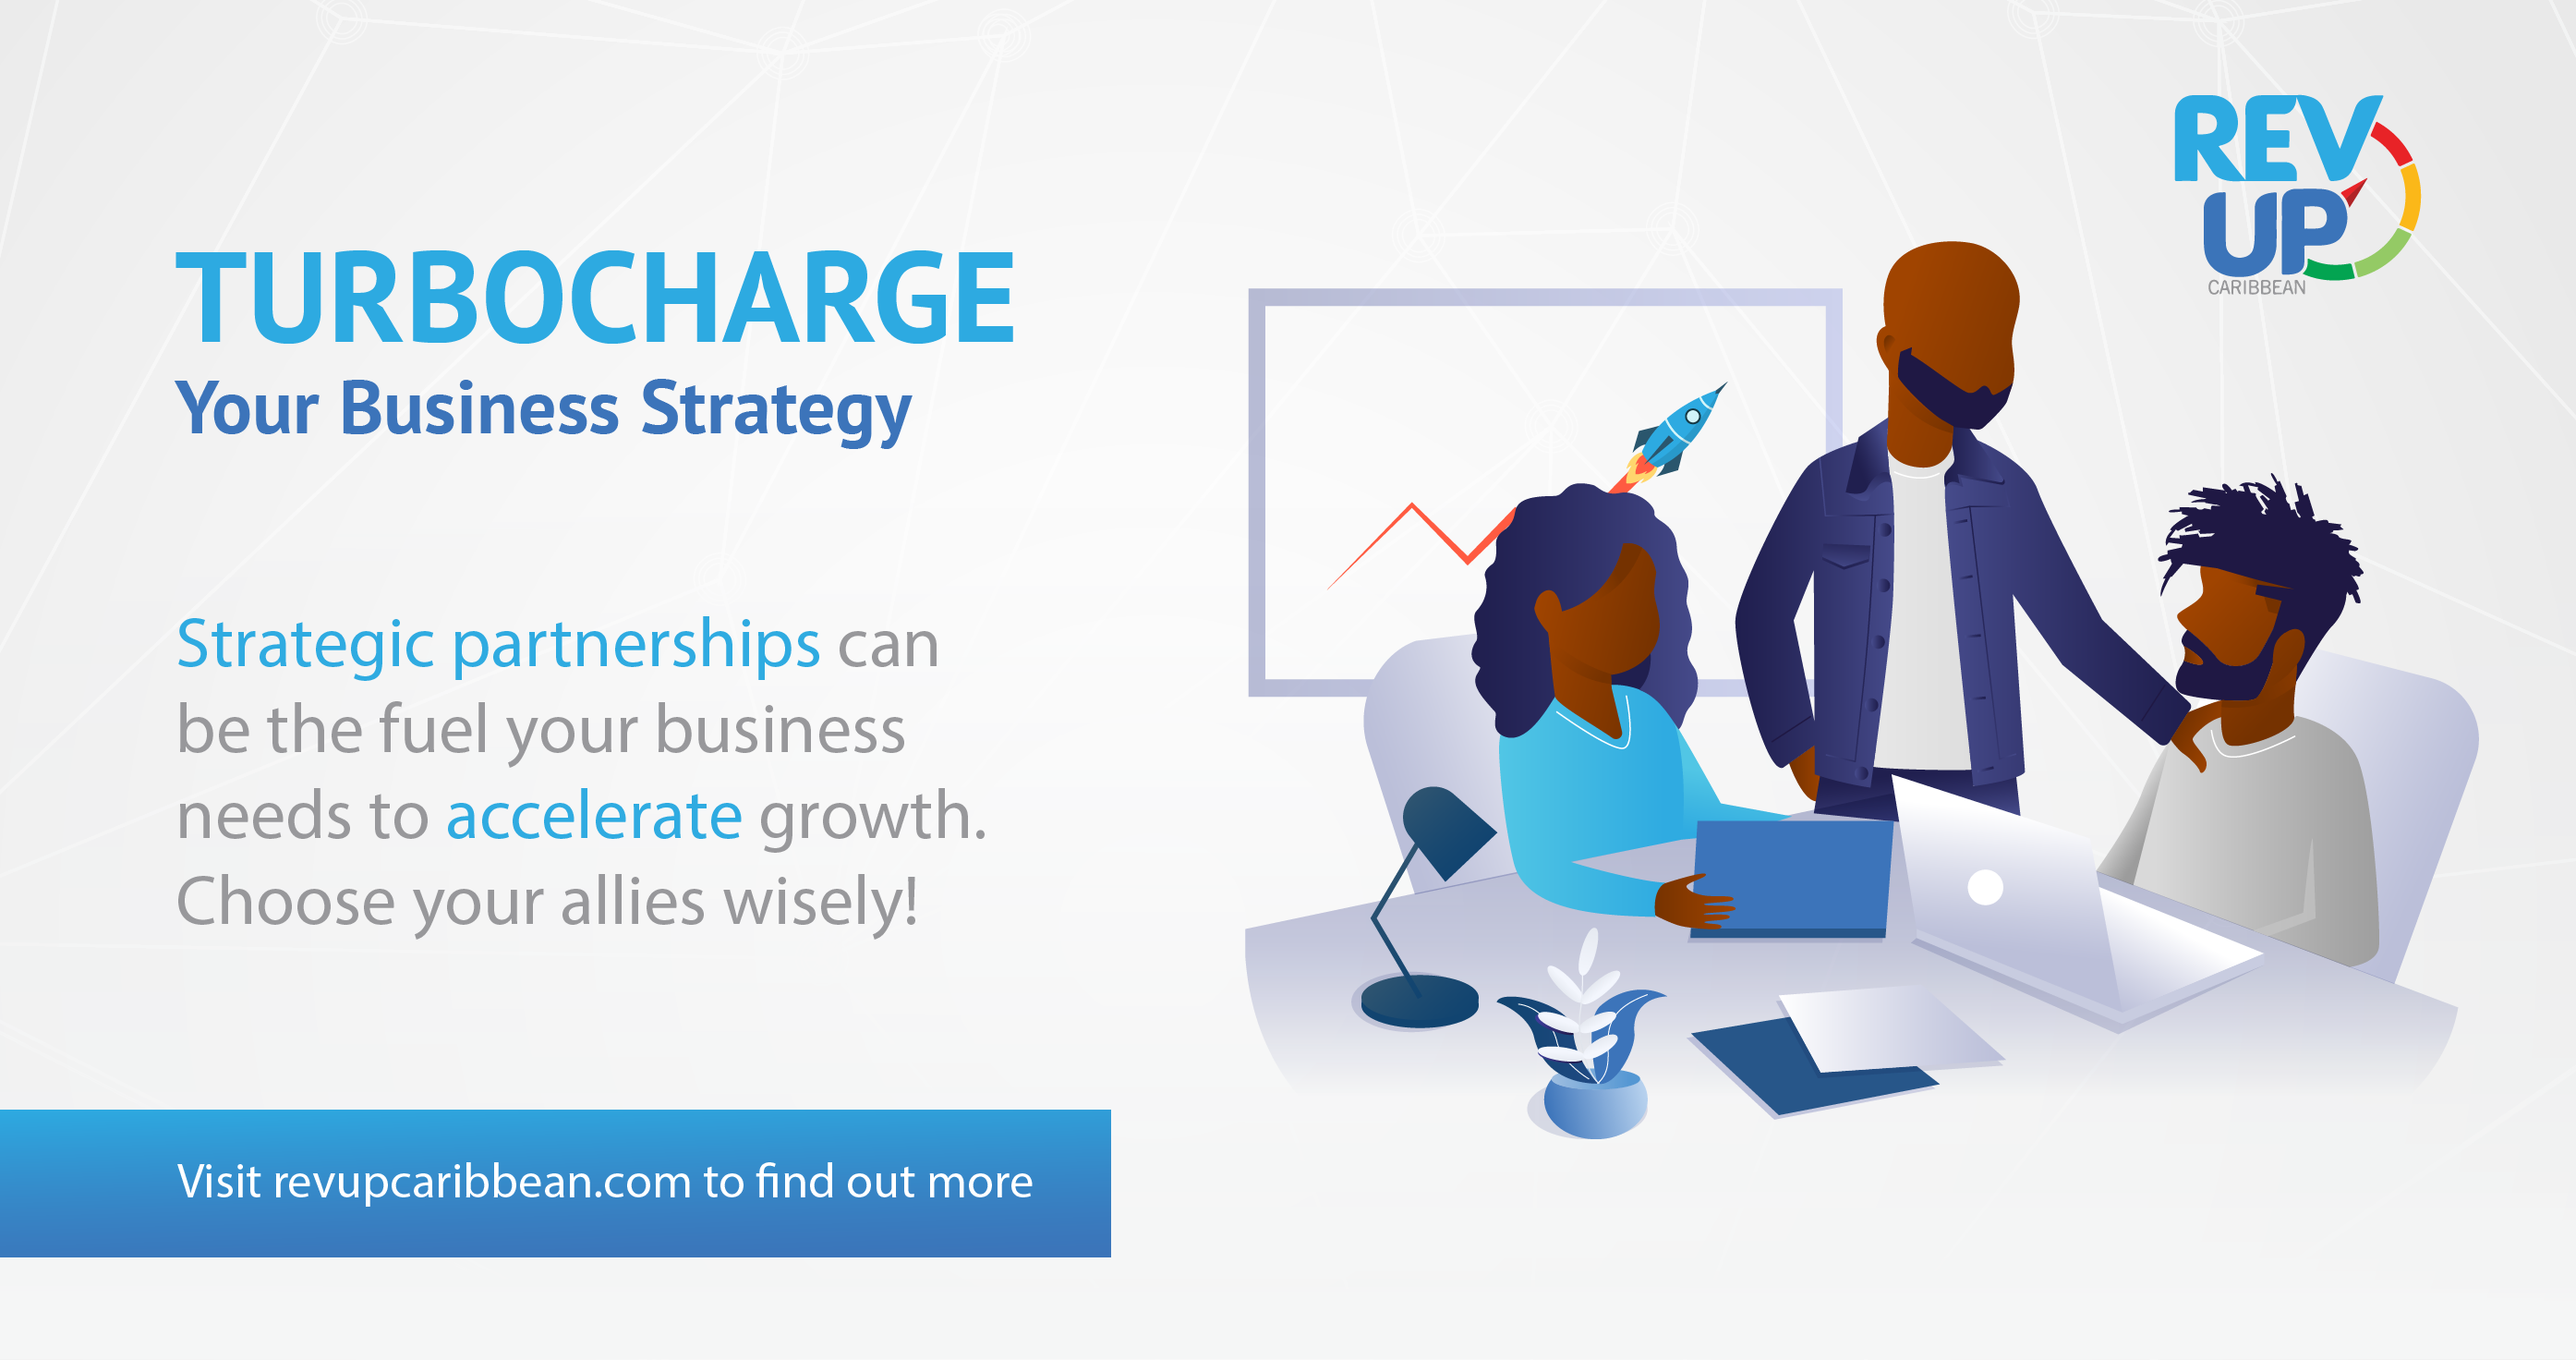 Accelerating Business Growth through Strategic Partnerships